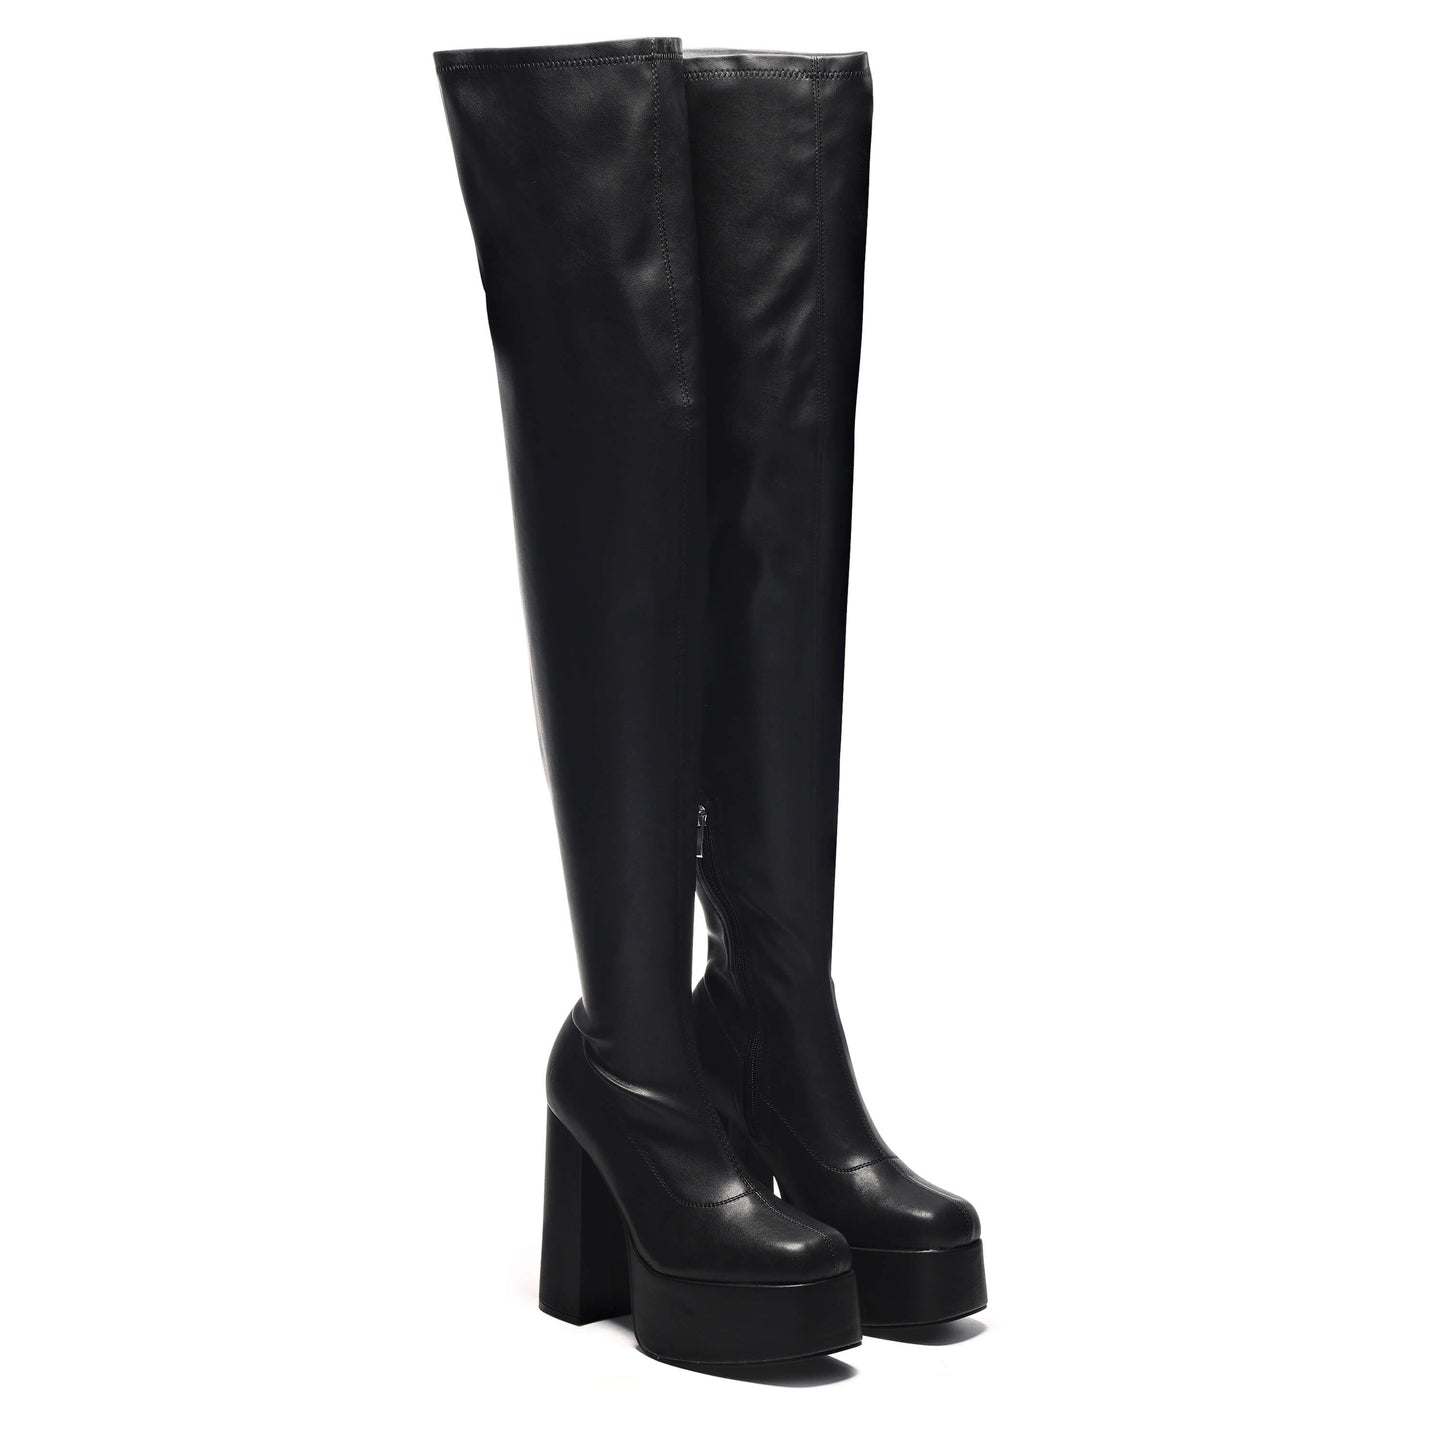 The Redemption Stretch Thigh High Boots - Long Boots - KOI Footwear - Black - Three-Quarter View